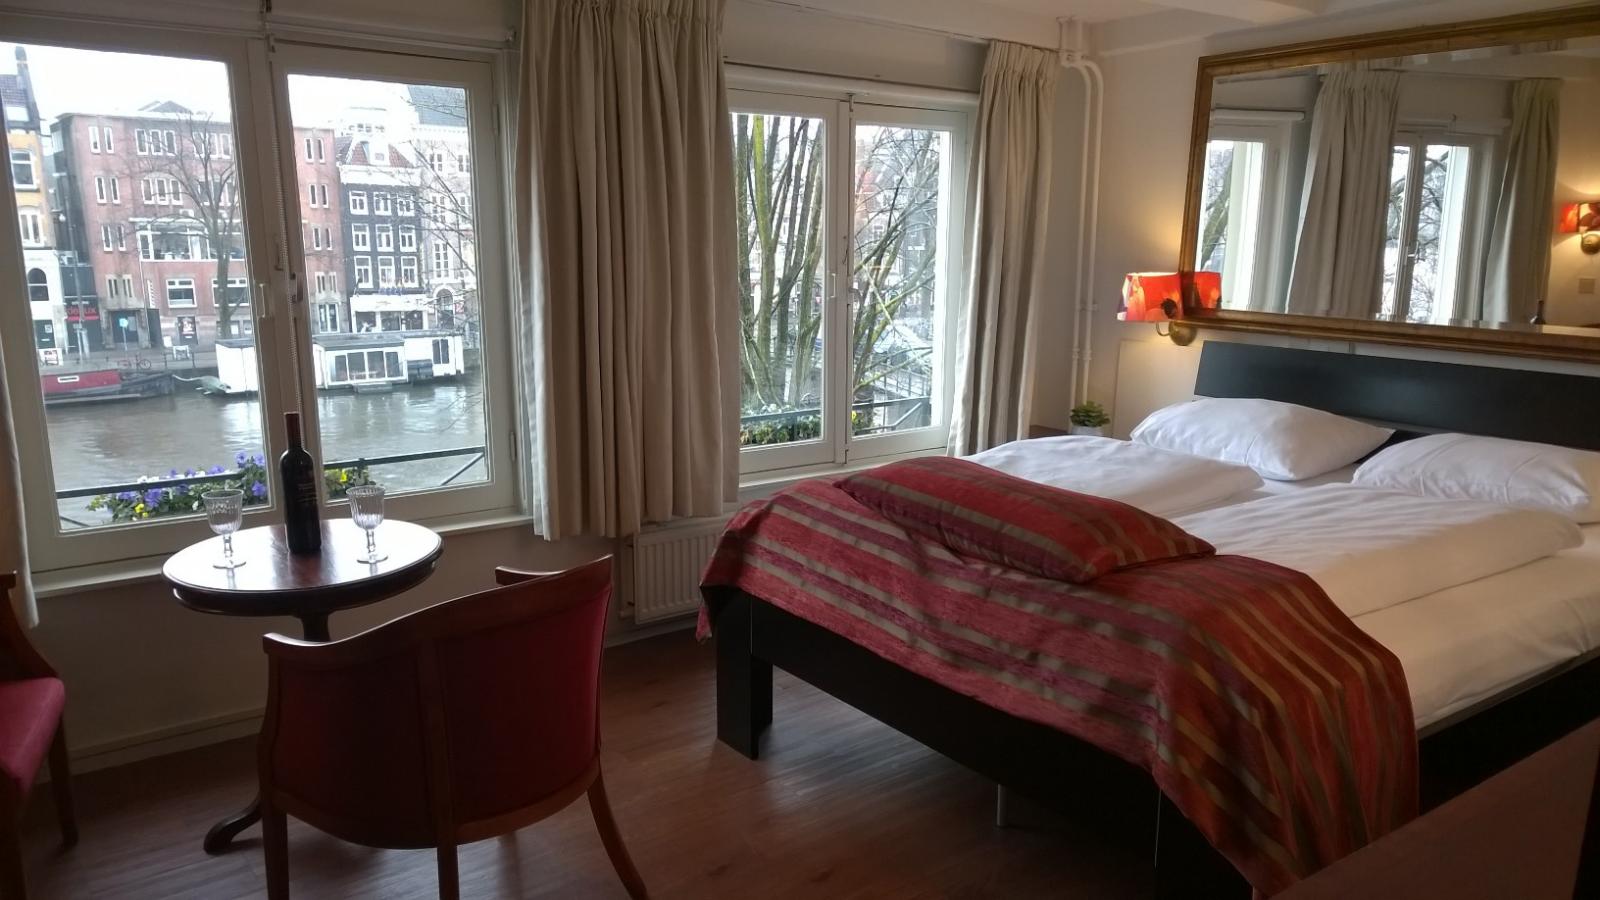 Room with a view - Amsterdam House Hotel